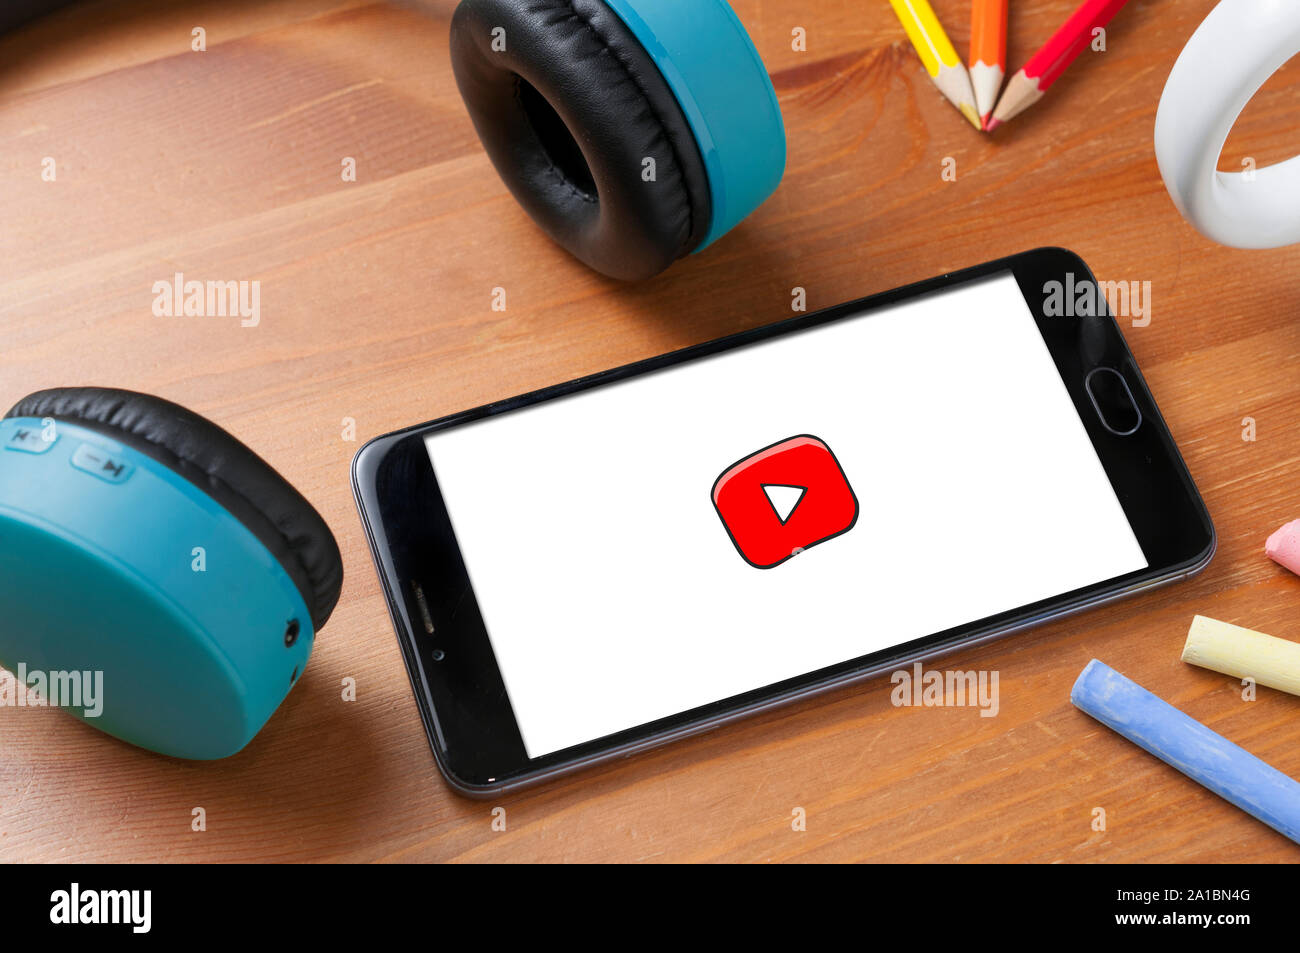 Carrara, Italy - September 25, 2019: Smartphone with Youtube Kids logo on wooden table next to a pair of wireless earphones, some pencils and some cha Stock Photo